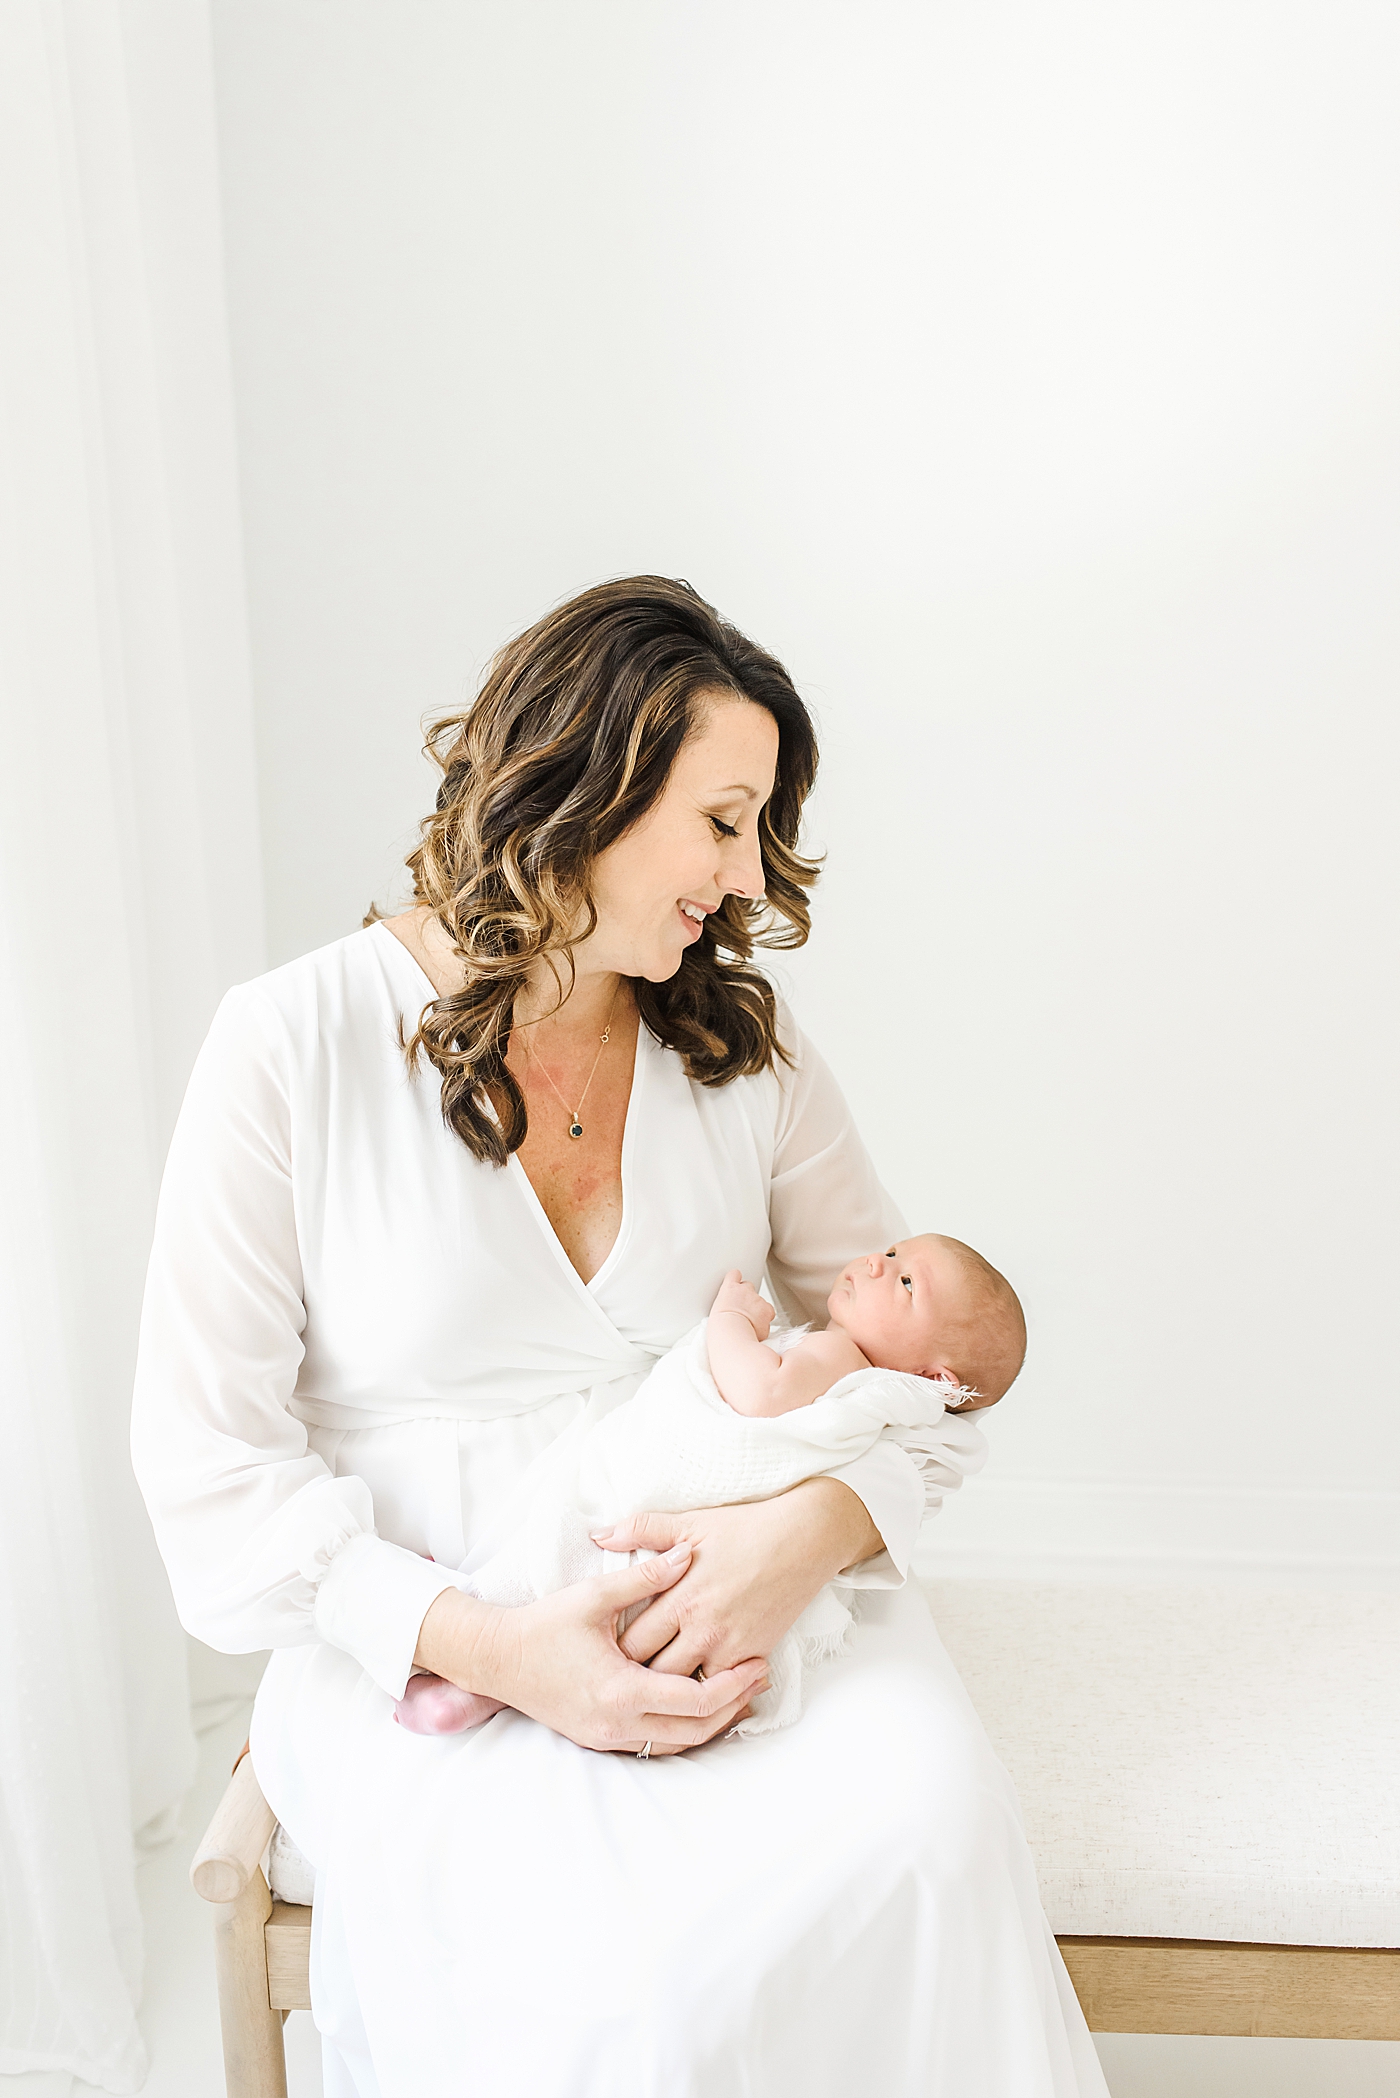 Mom in a white dress smiling at her new baby | Photo by Anna Wisjo Photography